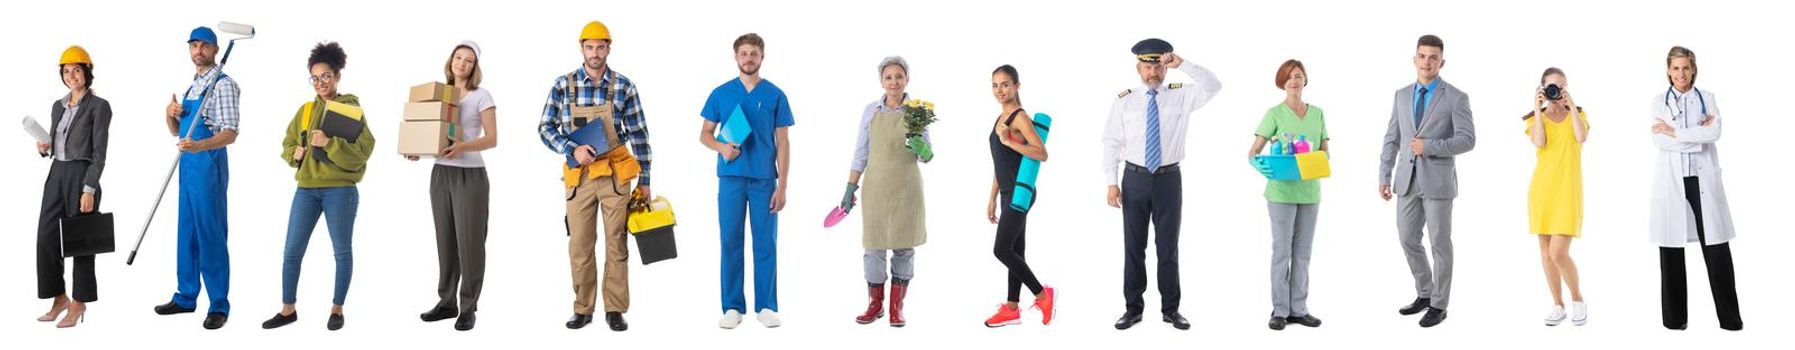 Set of professional workers different professions Isolated over white background.